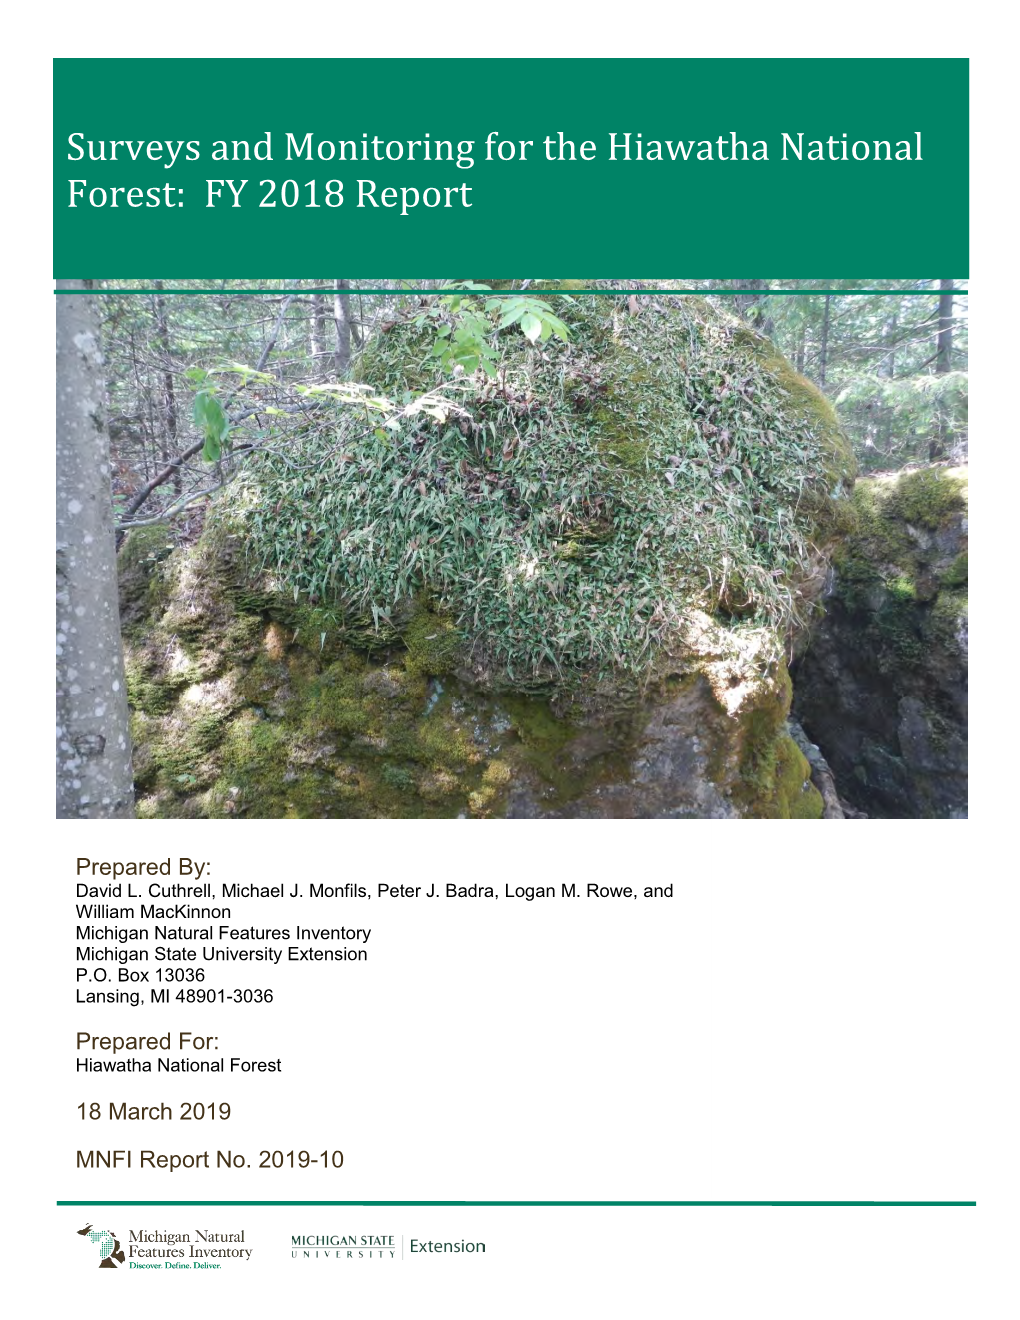 Surveys and Monitoring for the Hiawatha National Forest: FY 2018 Report